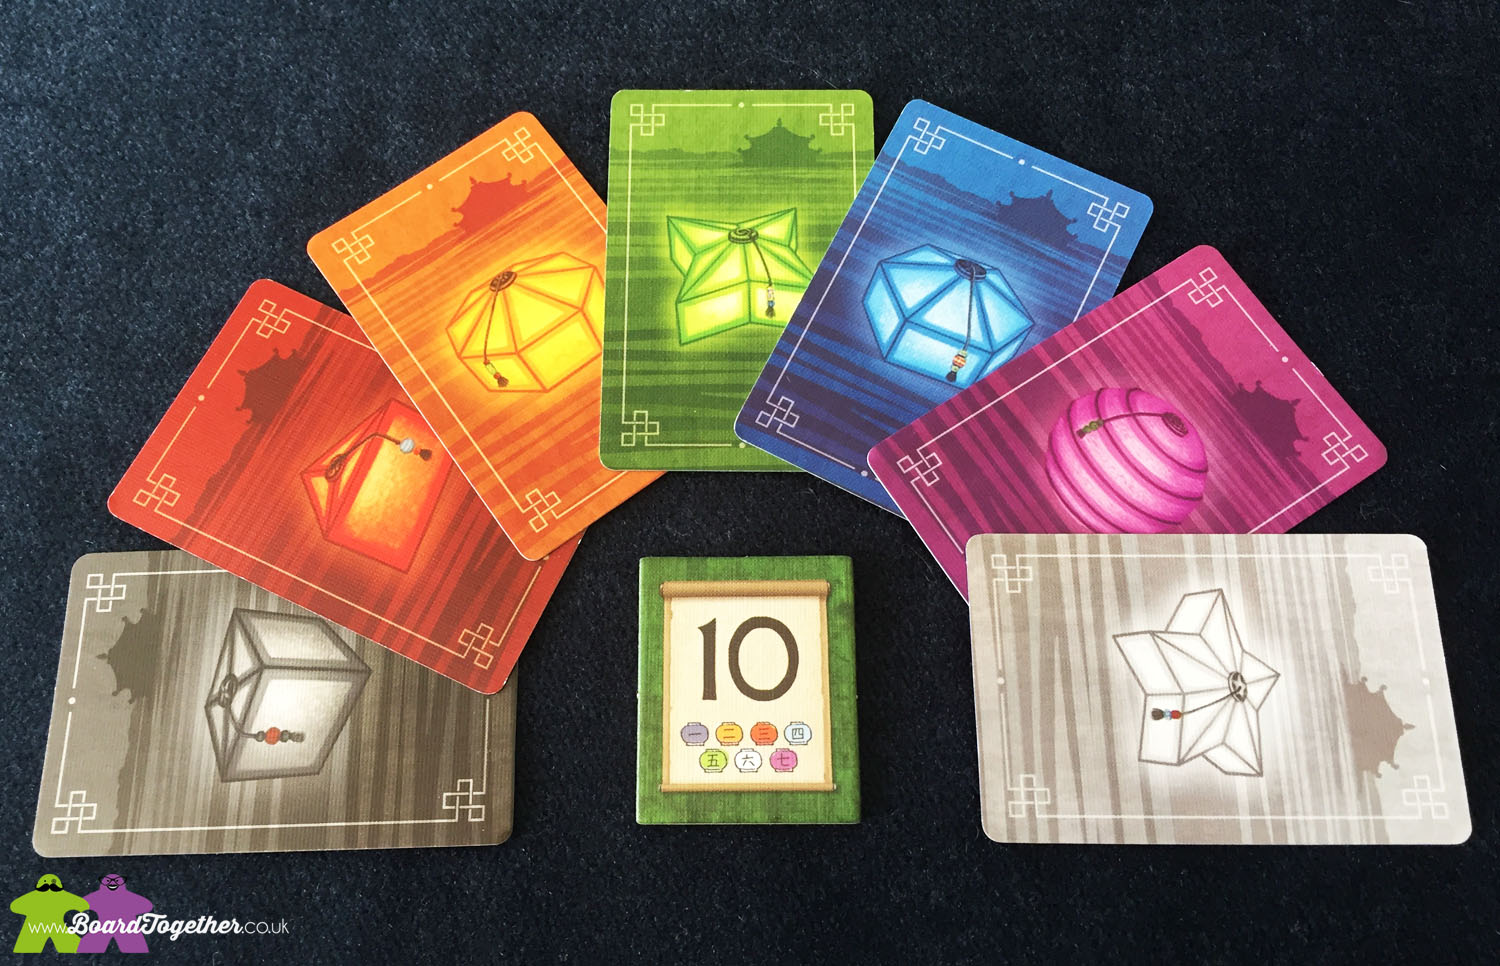 A Lanterns Boardgame review